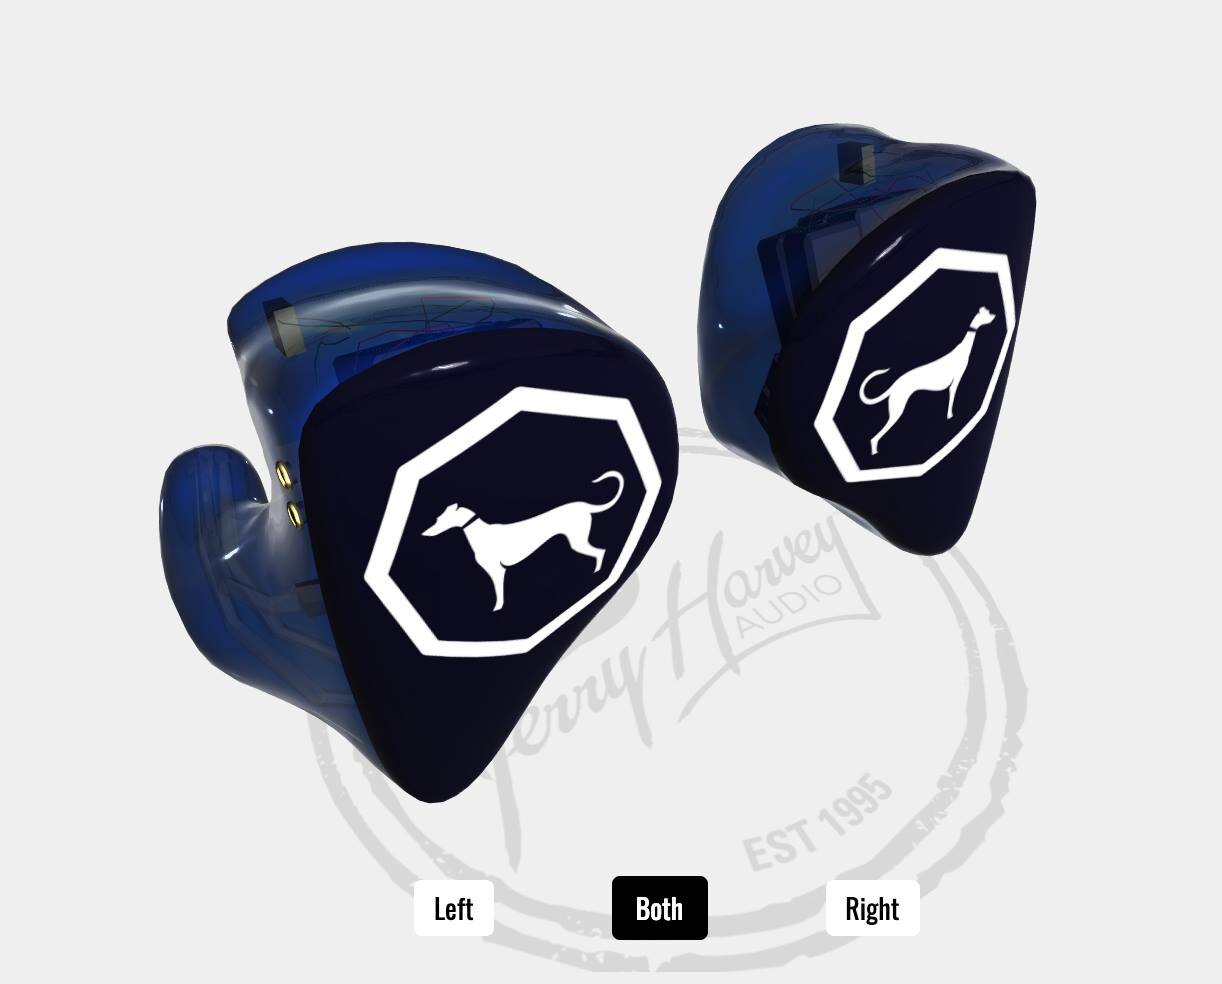 After 90 days, the company buys every new team member a Sighthound-branded JH Audio IEM.